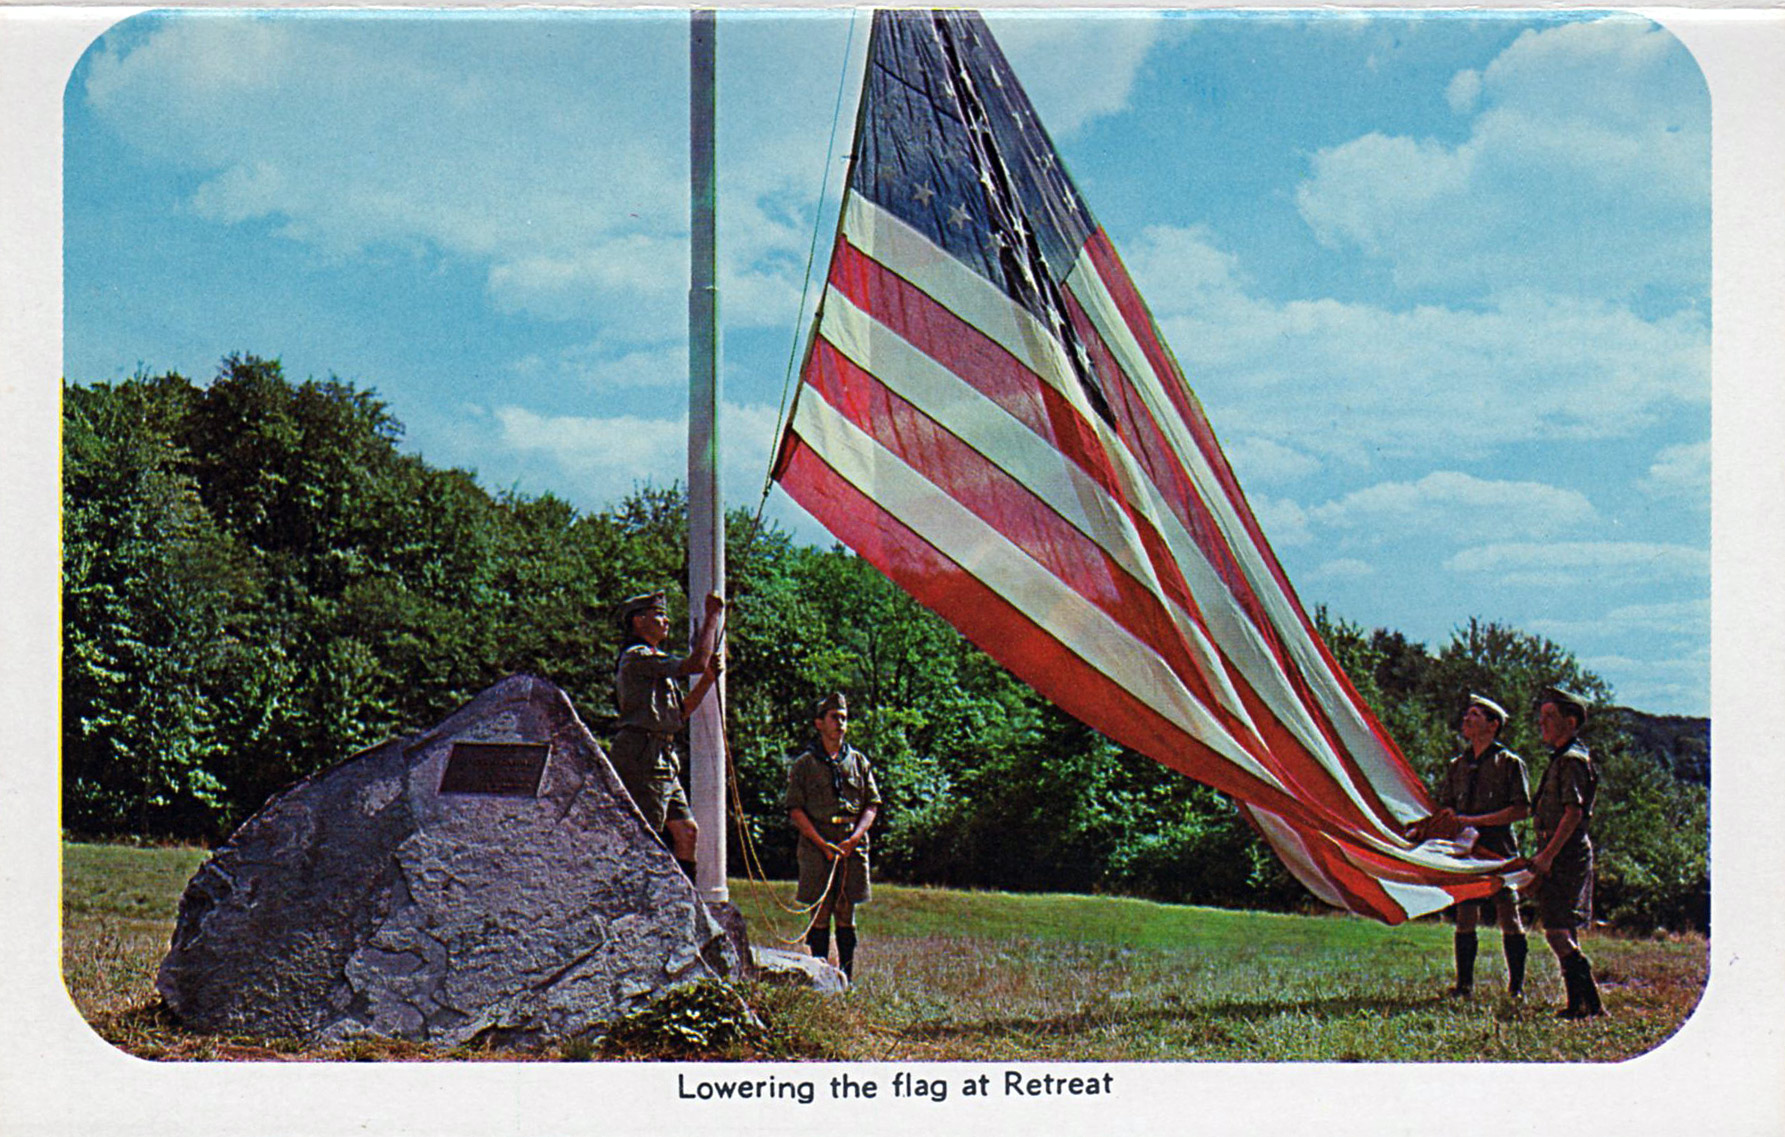 Lowering the flag at Retreat